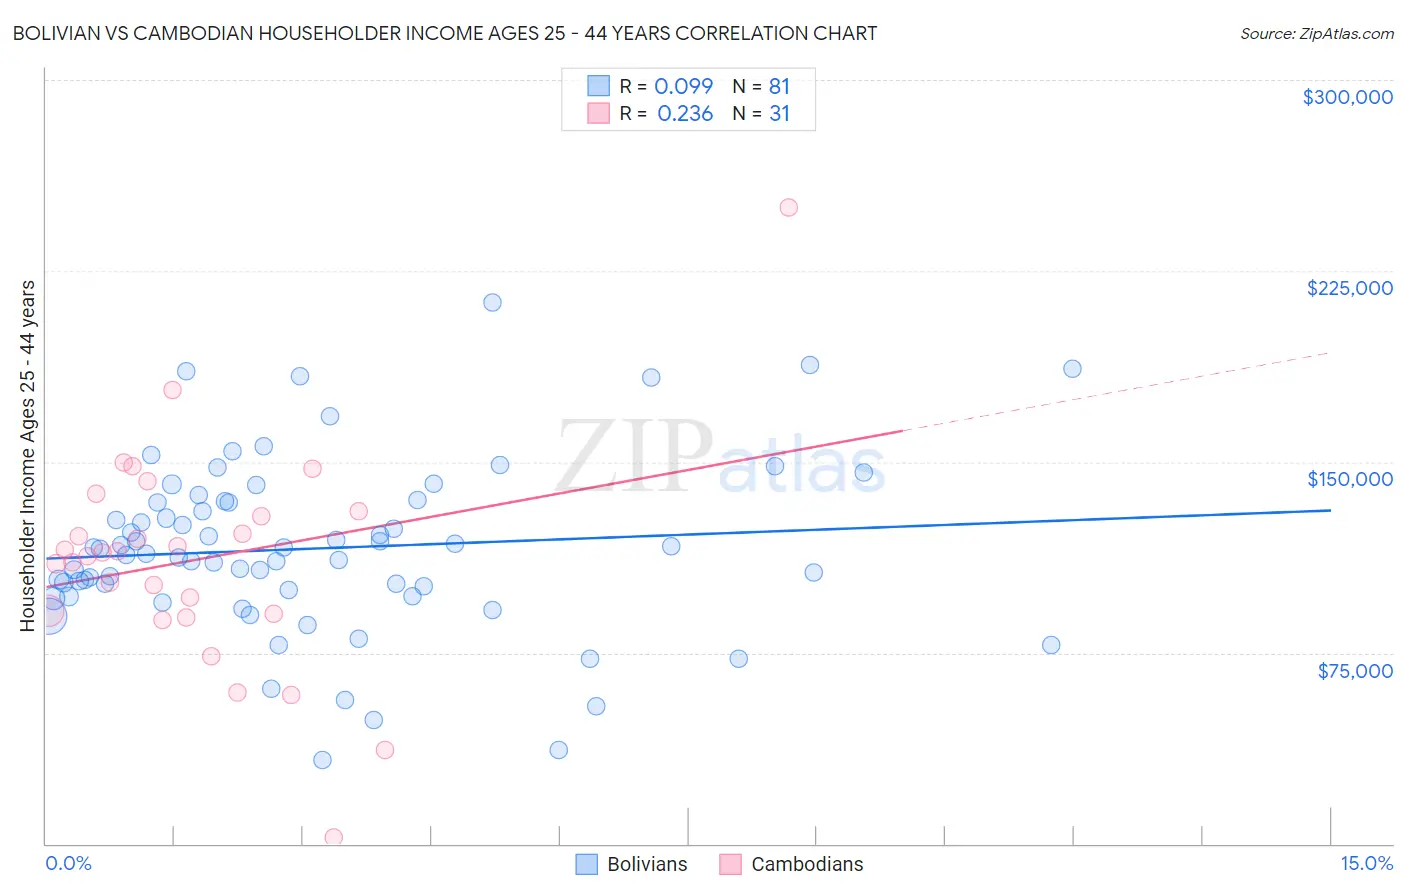 Bolivian vs Cambodian Householder Income Ages 25 - 44 years